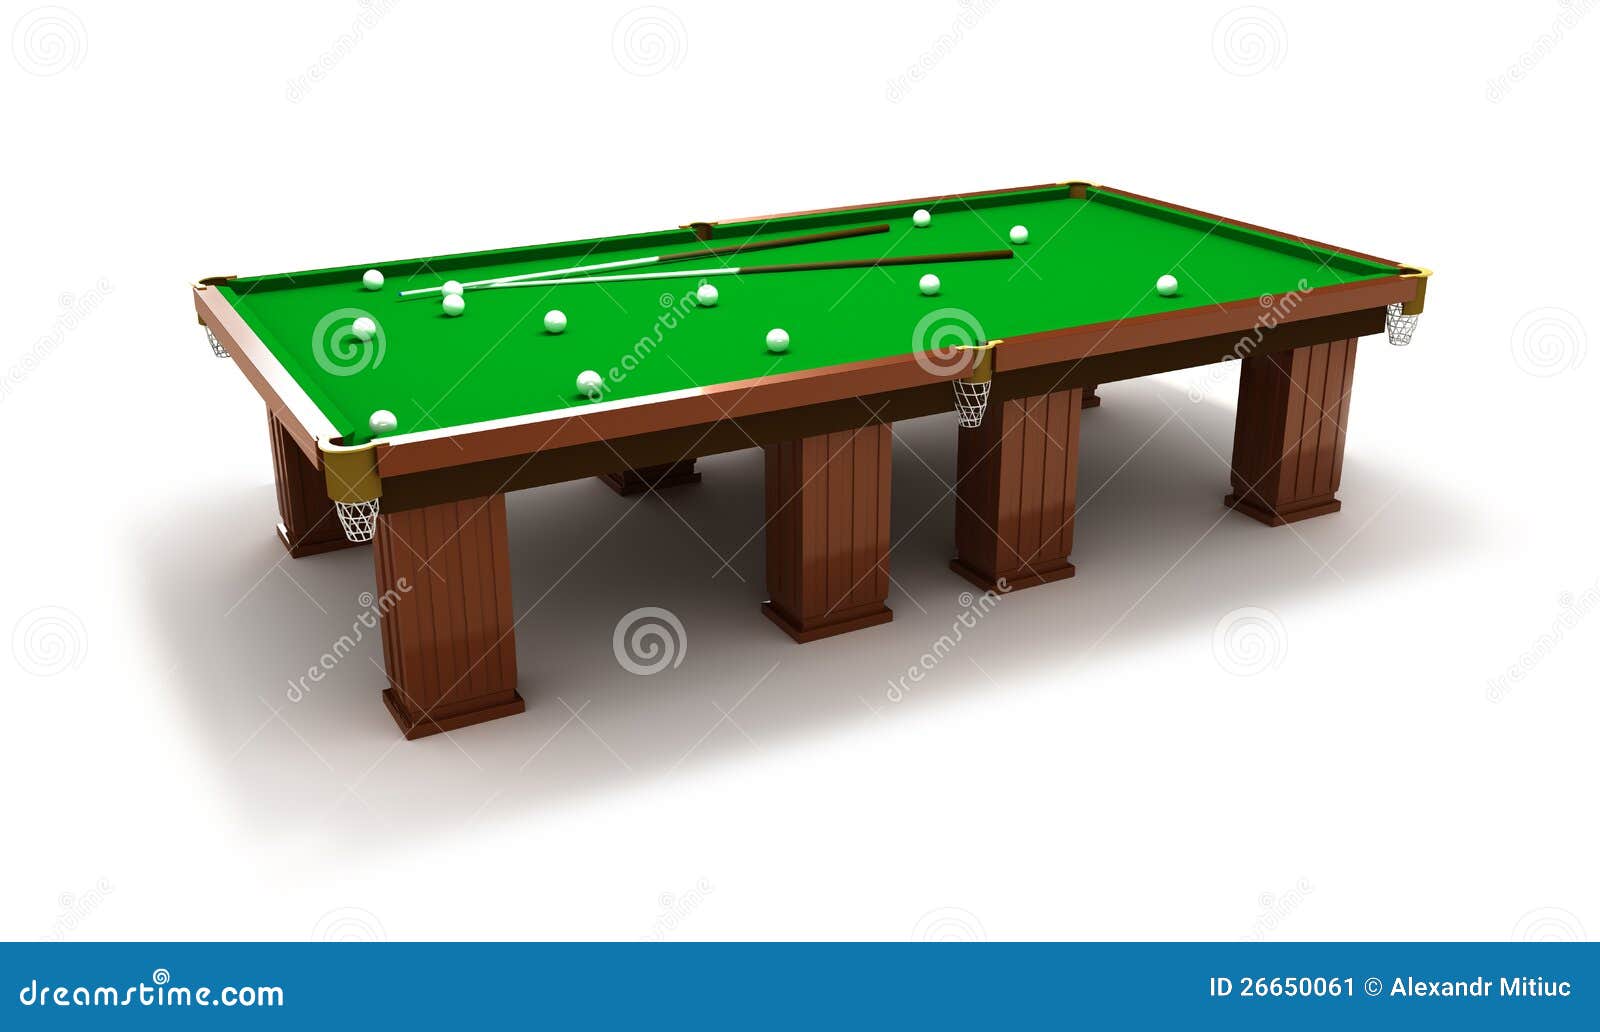 Billiard Table With Balls And Cues Stock Image Image: 26650061